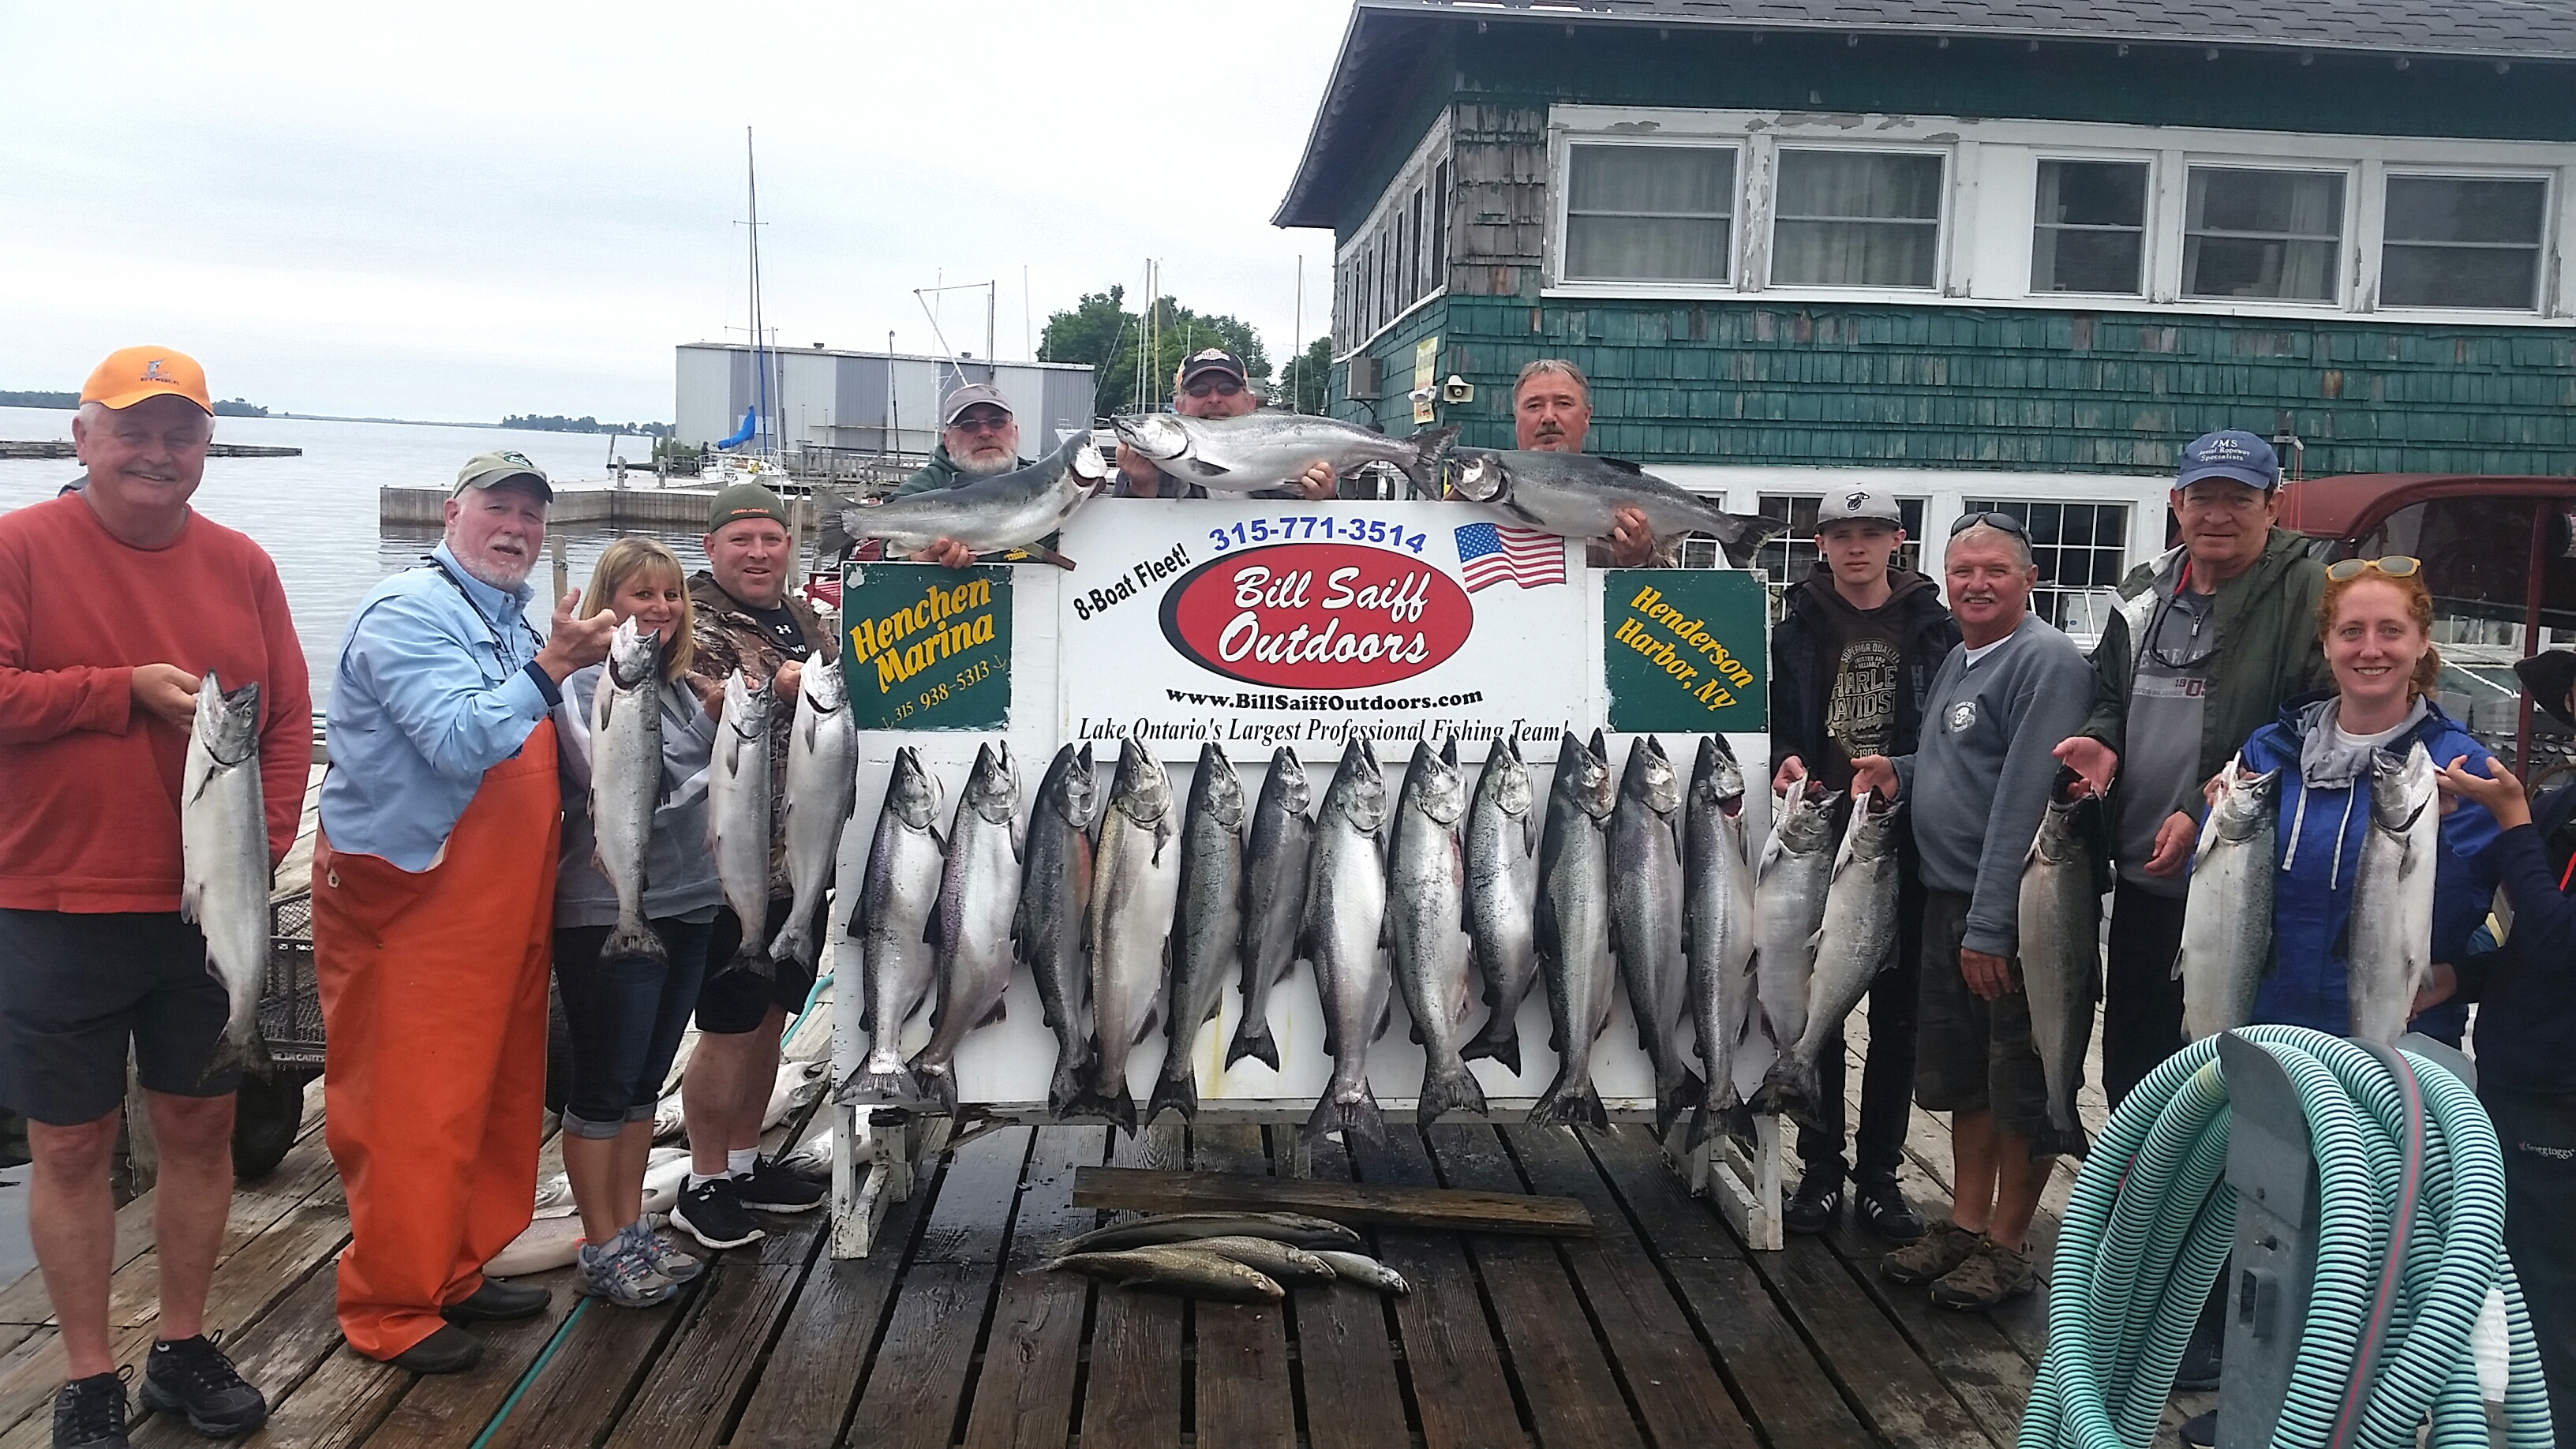 Salmon Fishing - The Best we have ever seen!!! - Bill Saiff Outdoors